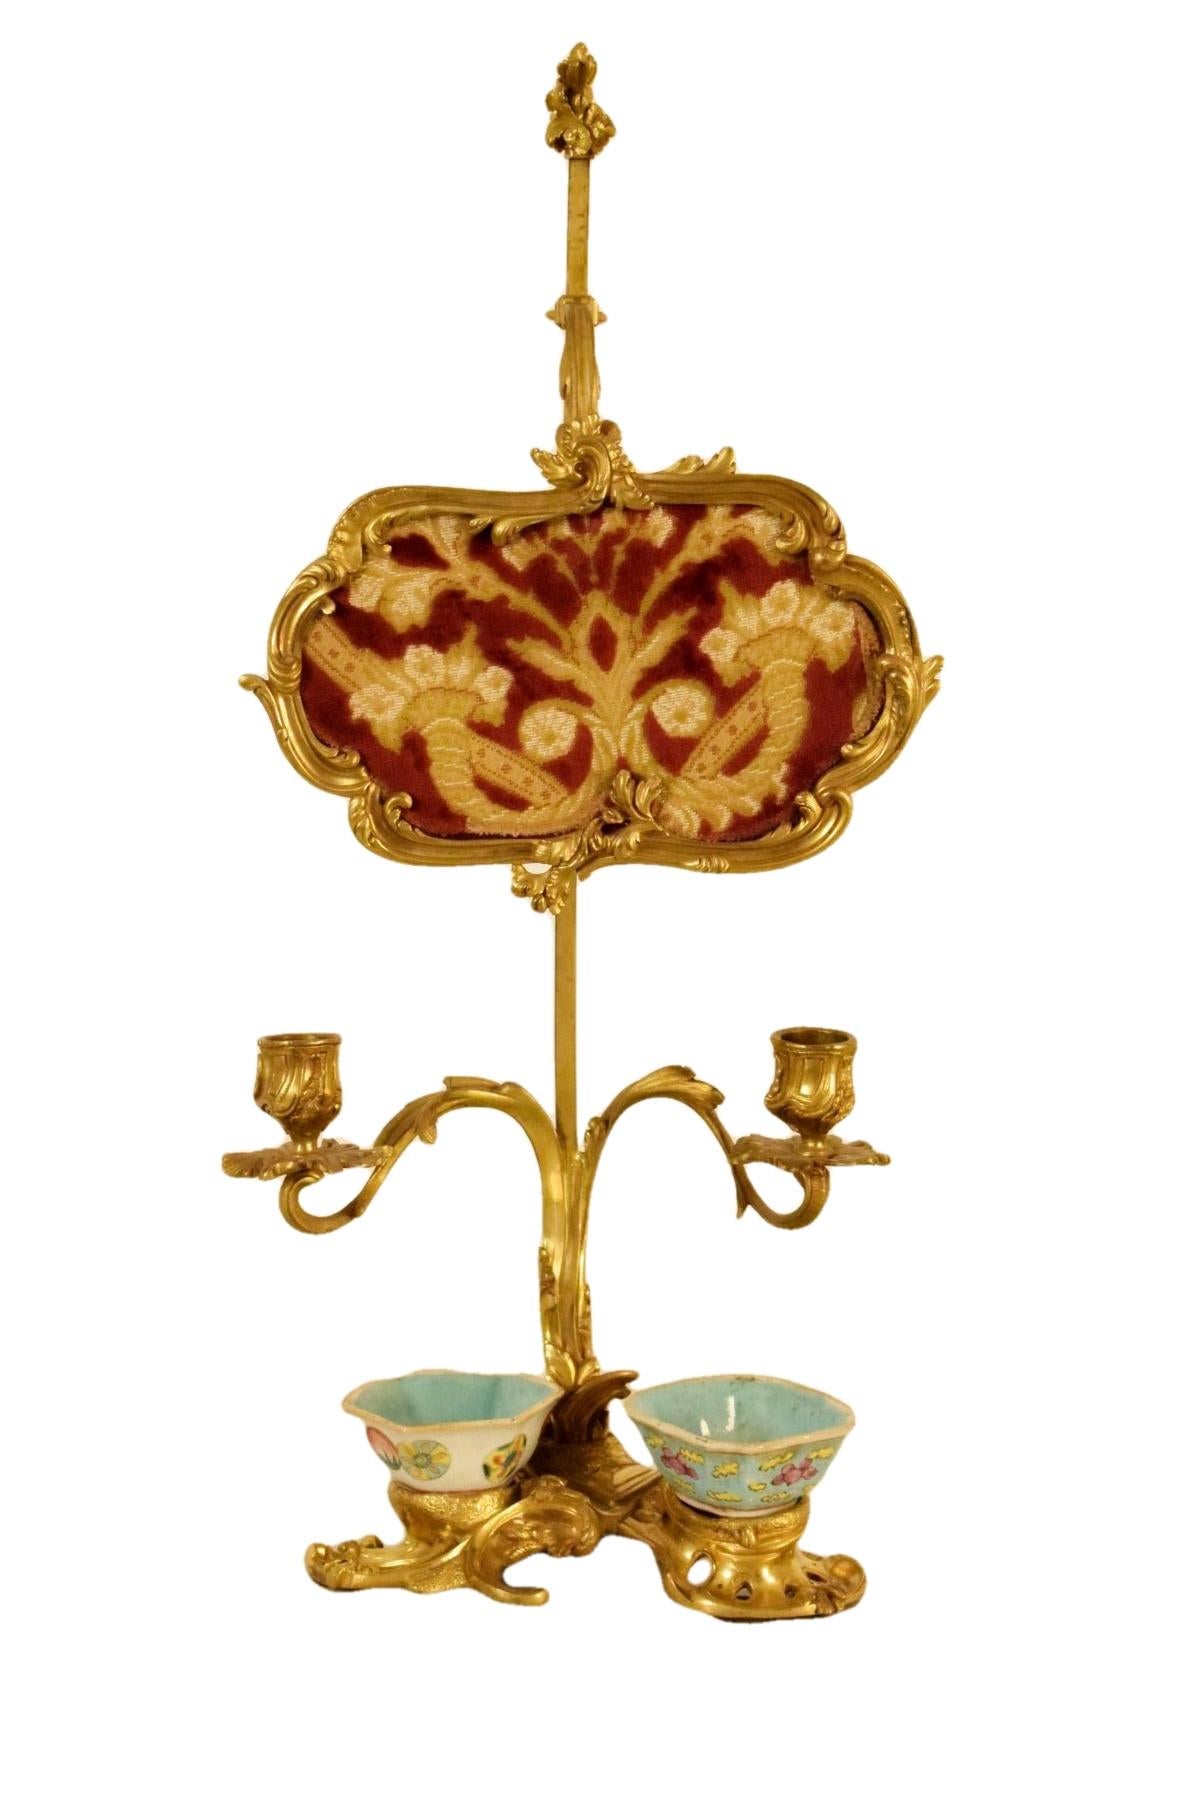 19th Century French Gilt Bronze Desk Candlestick with Cinese Ceramic Inkwell 

This desk lamp was made in France at the beginning of the 19th century, in Louis XV style.
The particular desk candlestick consists of a gilded bronze structure finely